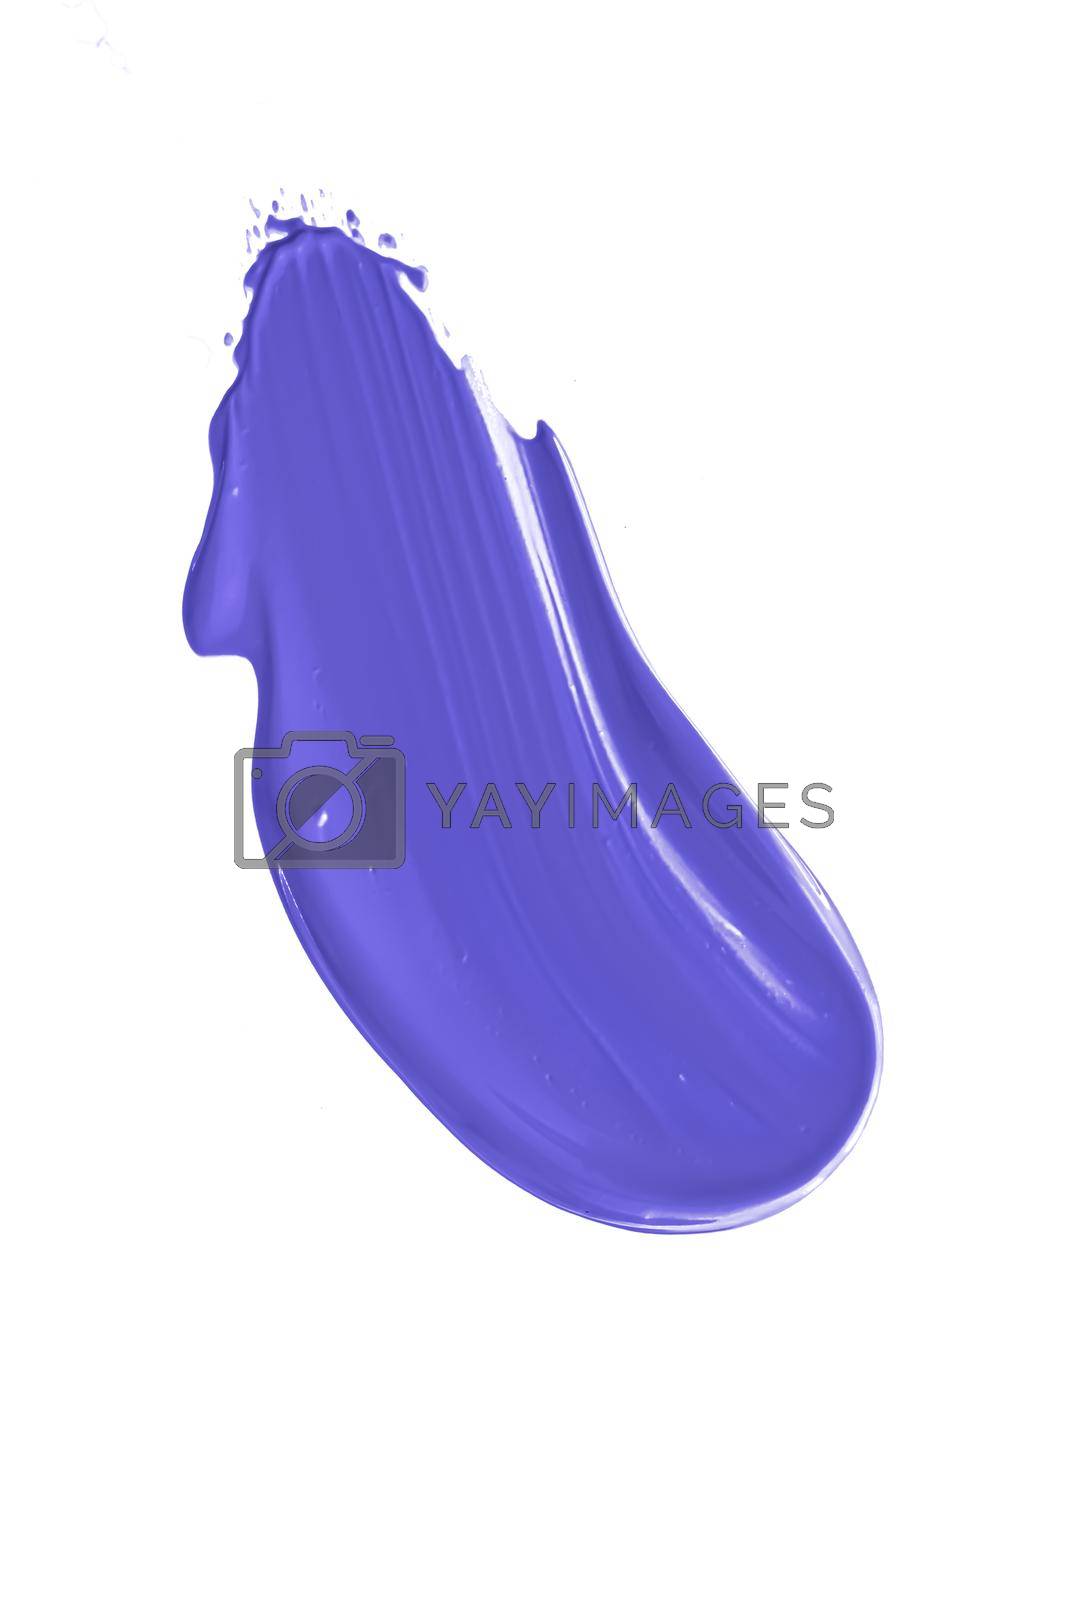 Royalty free image of Lavender purple beauty cosmetic texture isolated on white background, smudged makeup smear or cosmetics product smudge, paint brush strokes by Anneleven